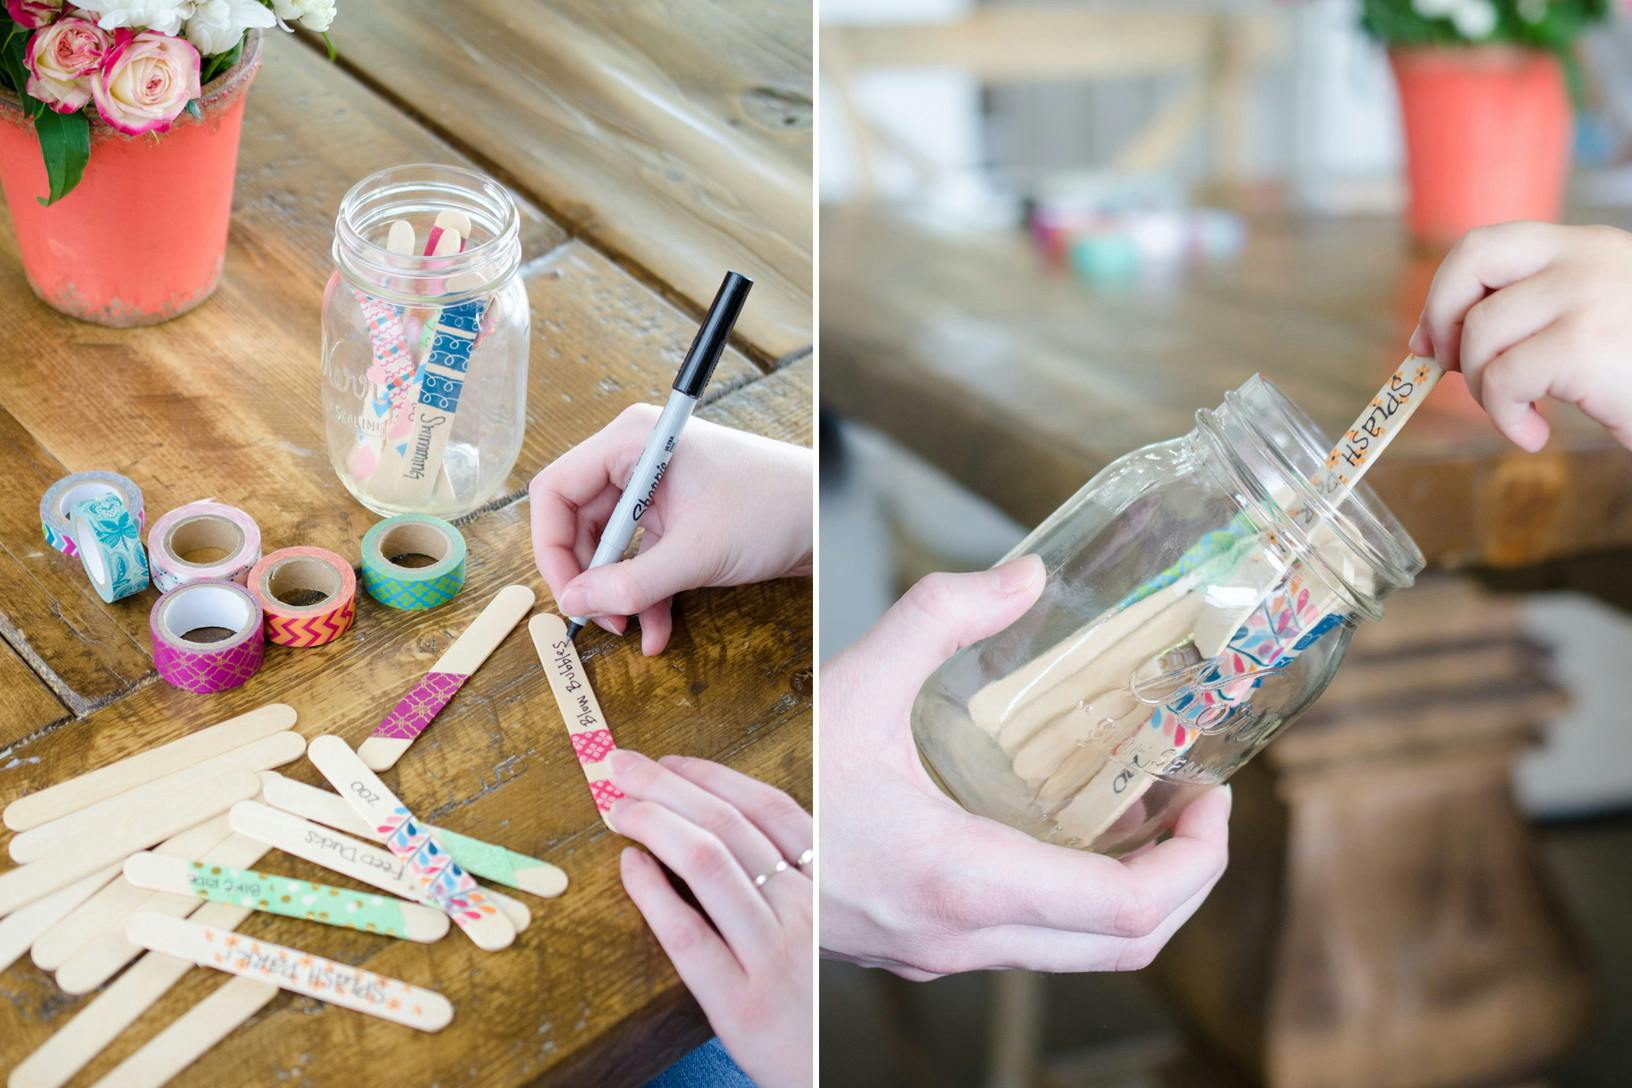 Someone writing ideas on popsicle sticks then placing them in a jar.